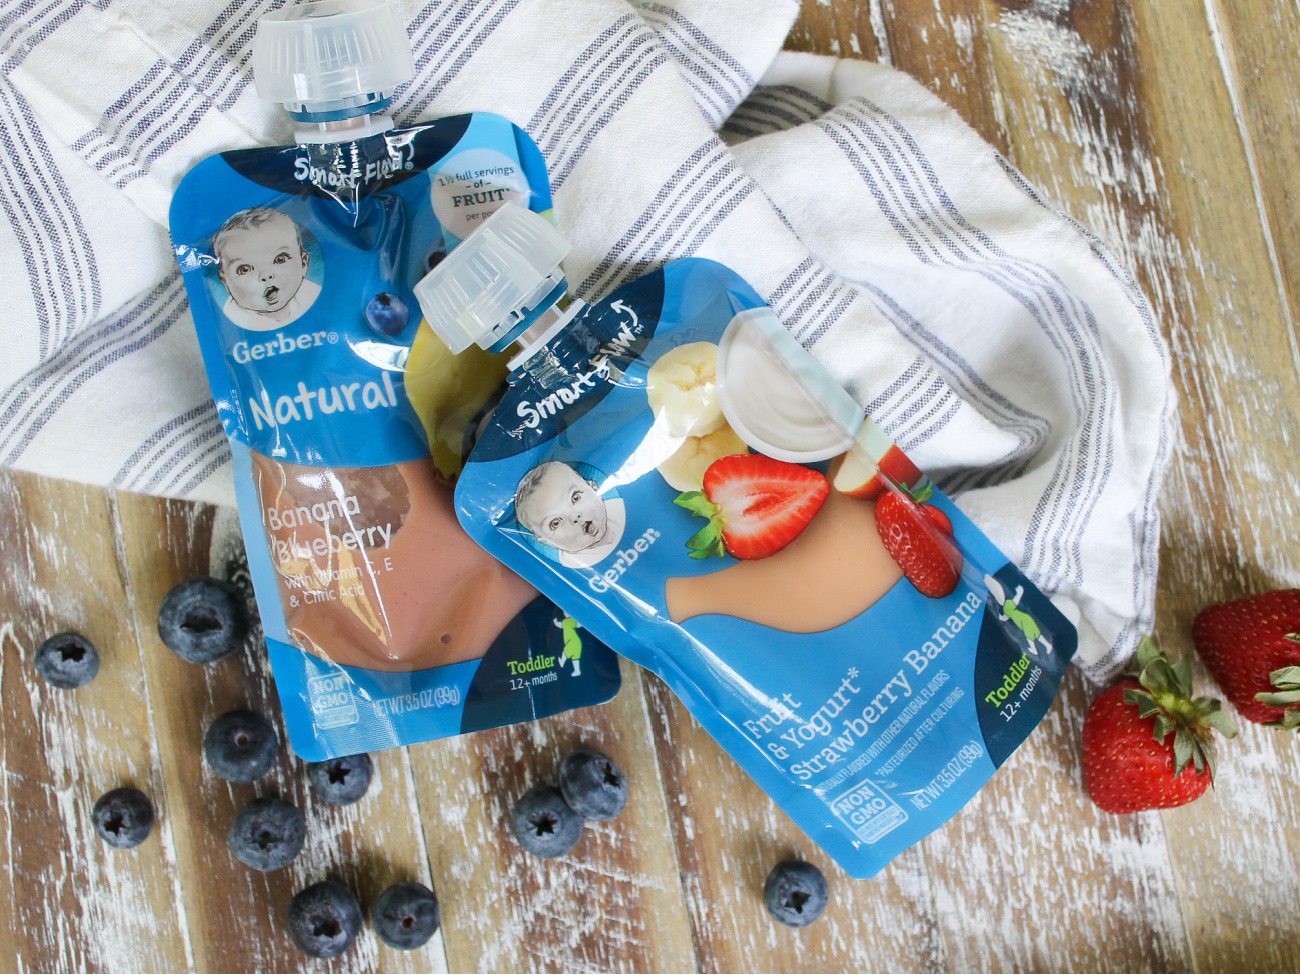 Gerber Baby Food As Low As 49¢ Per Pouch At Kroger